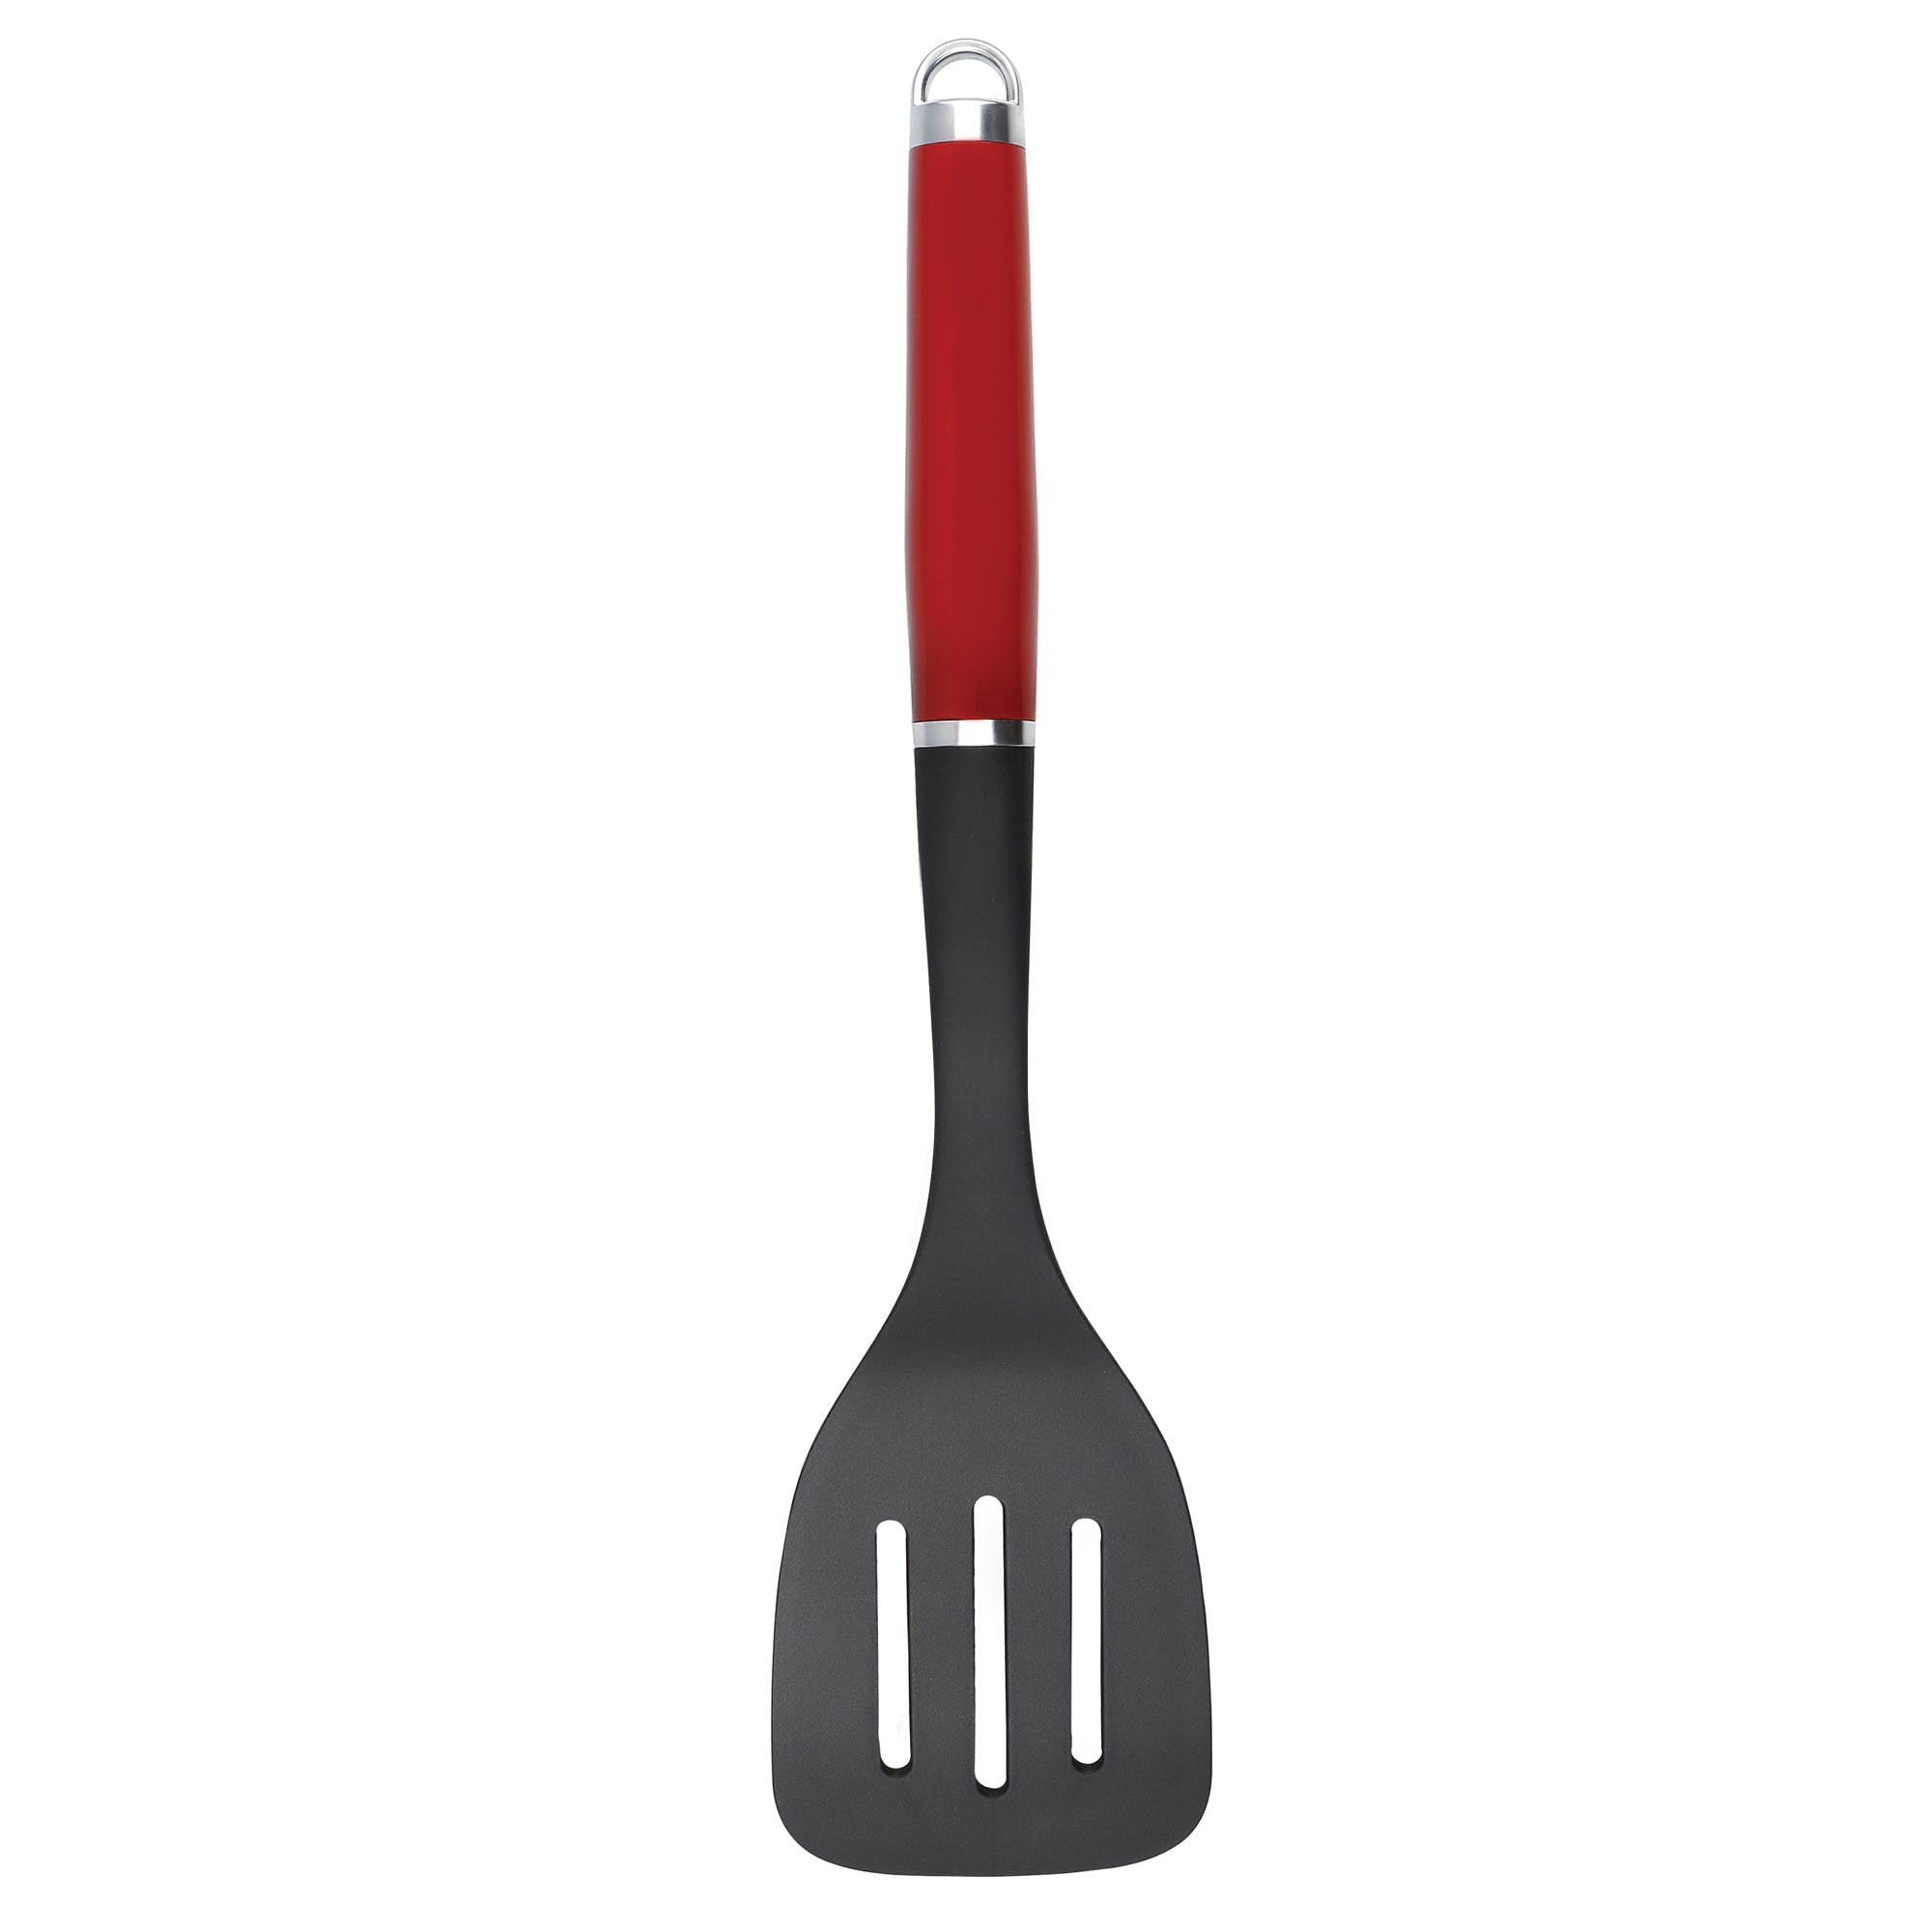 KitchenAid Slotted Turner Empire Red KAG002OHERE